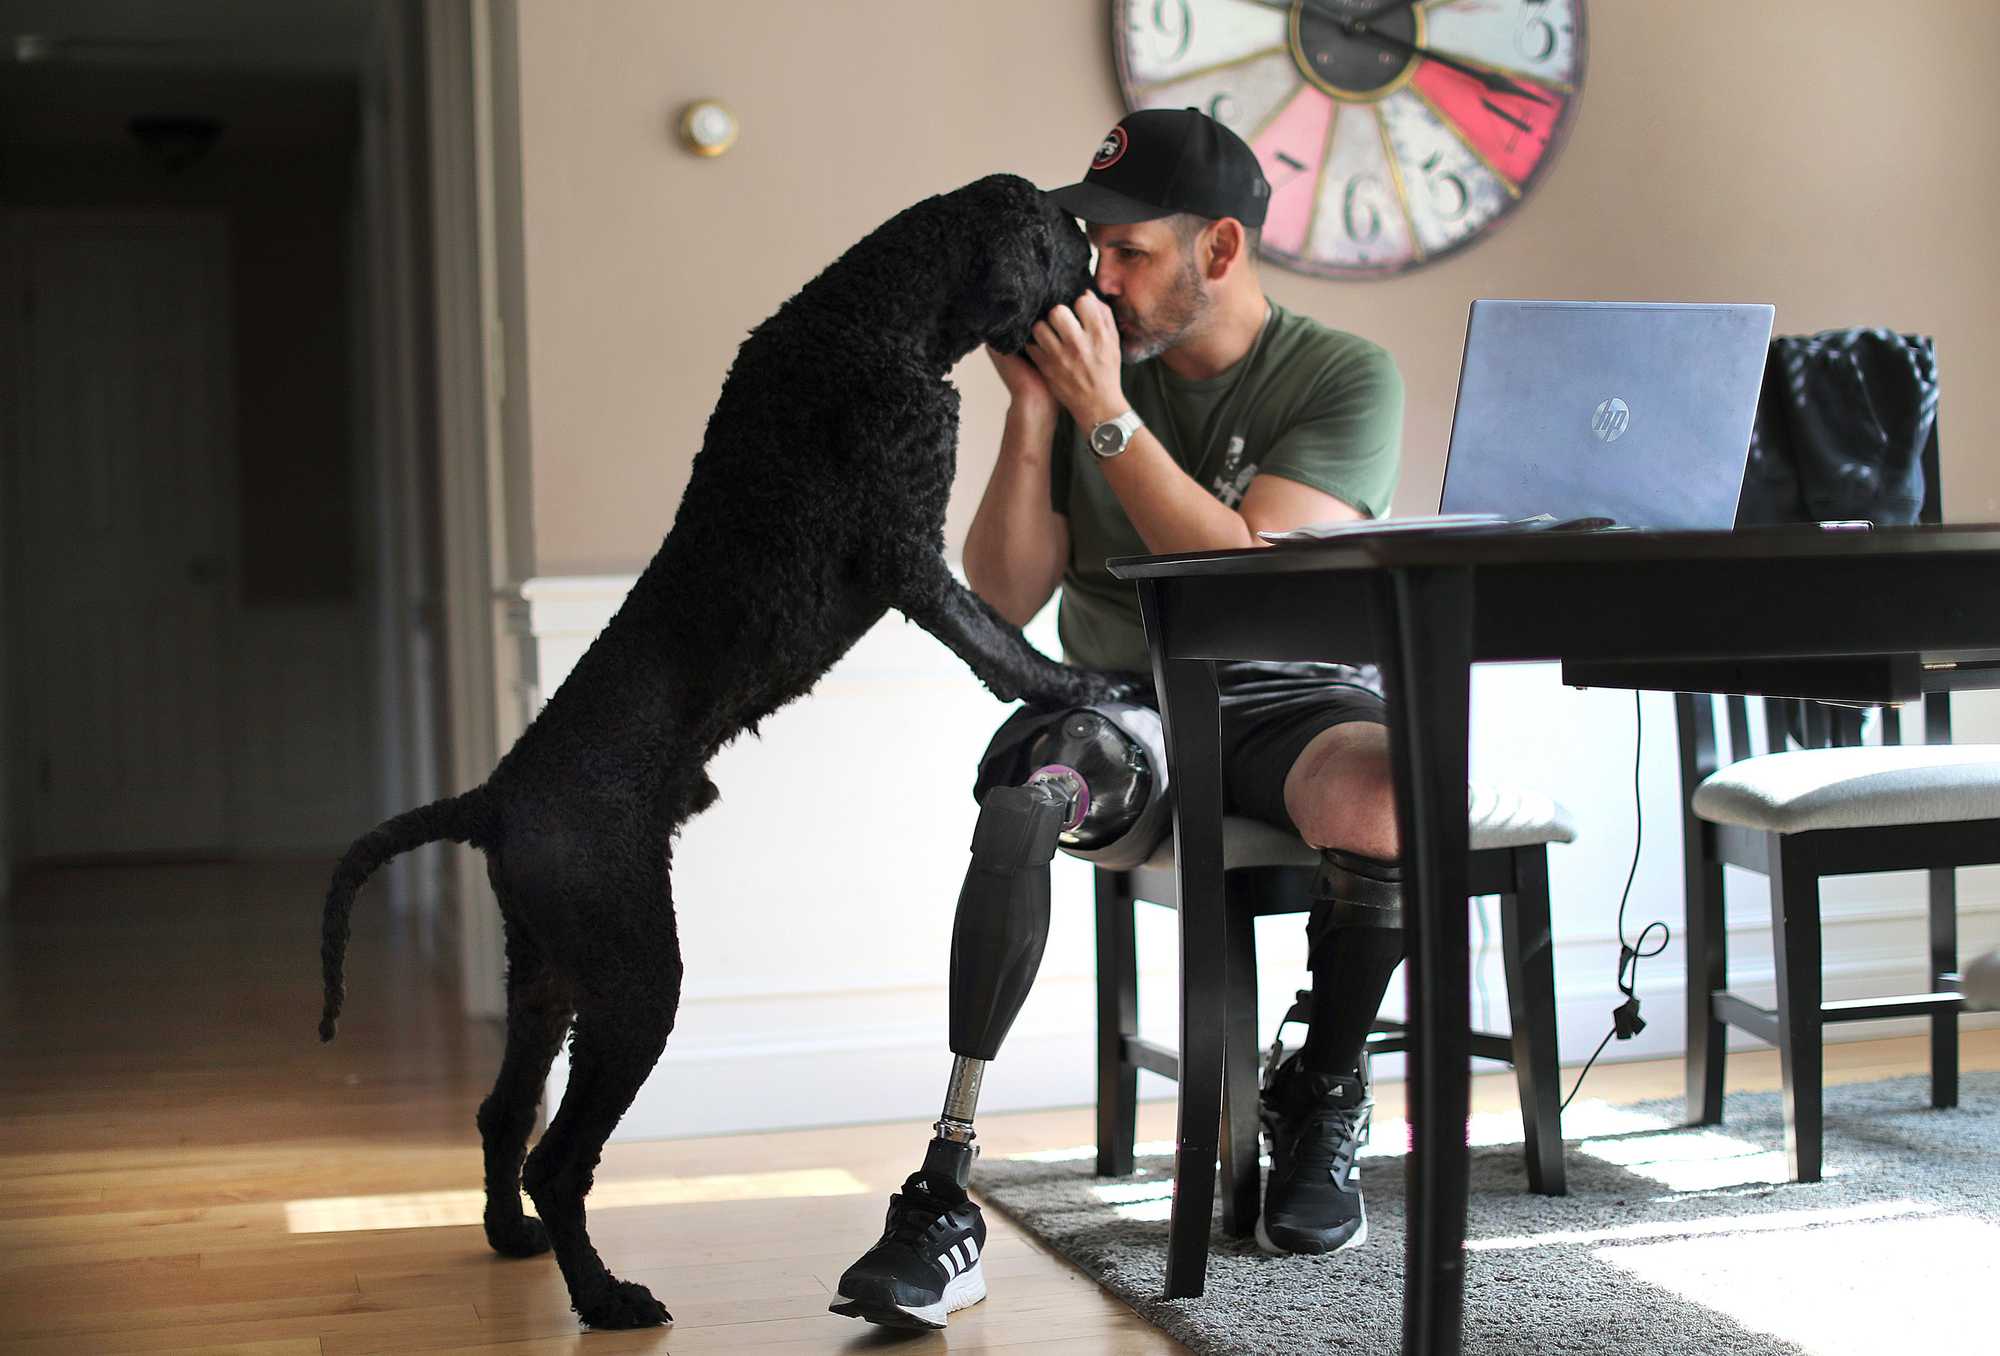 Marc Fucarile kissed his support dog, Onyx, as he worked on his laptop at the kitchen table in Reading. 